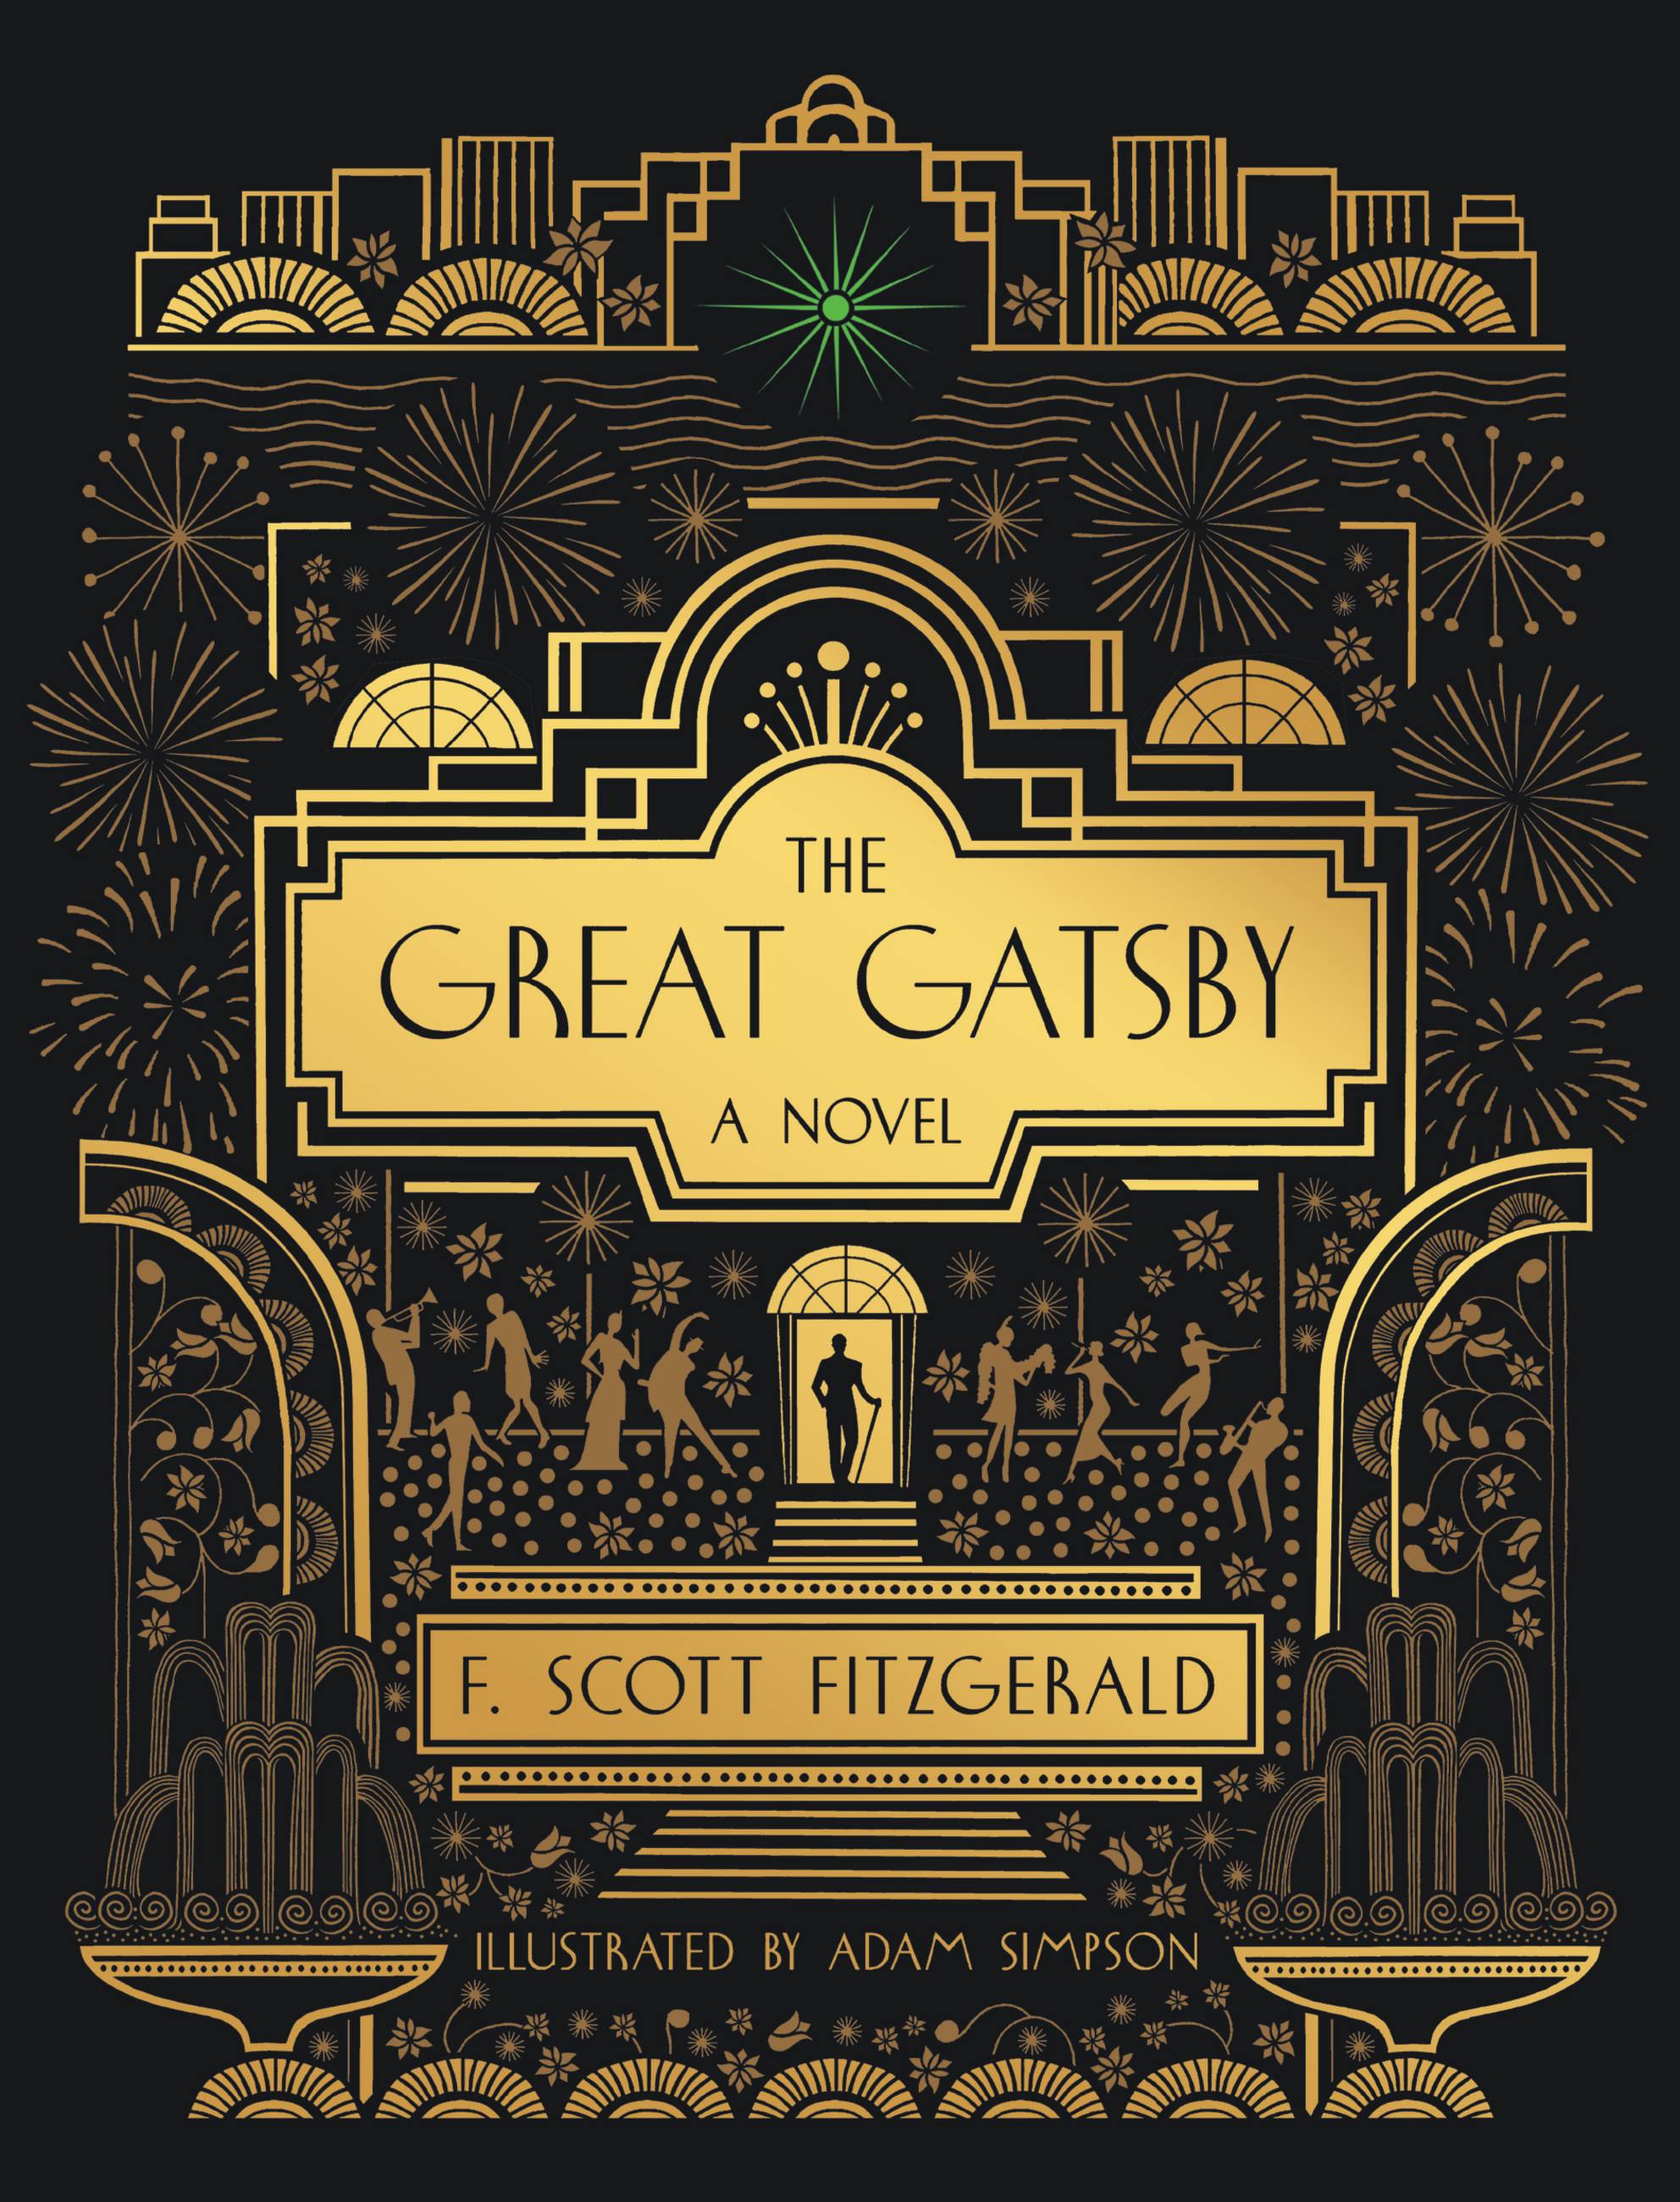 The Great Gatsby by F. Scott Fitzgerald See more